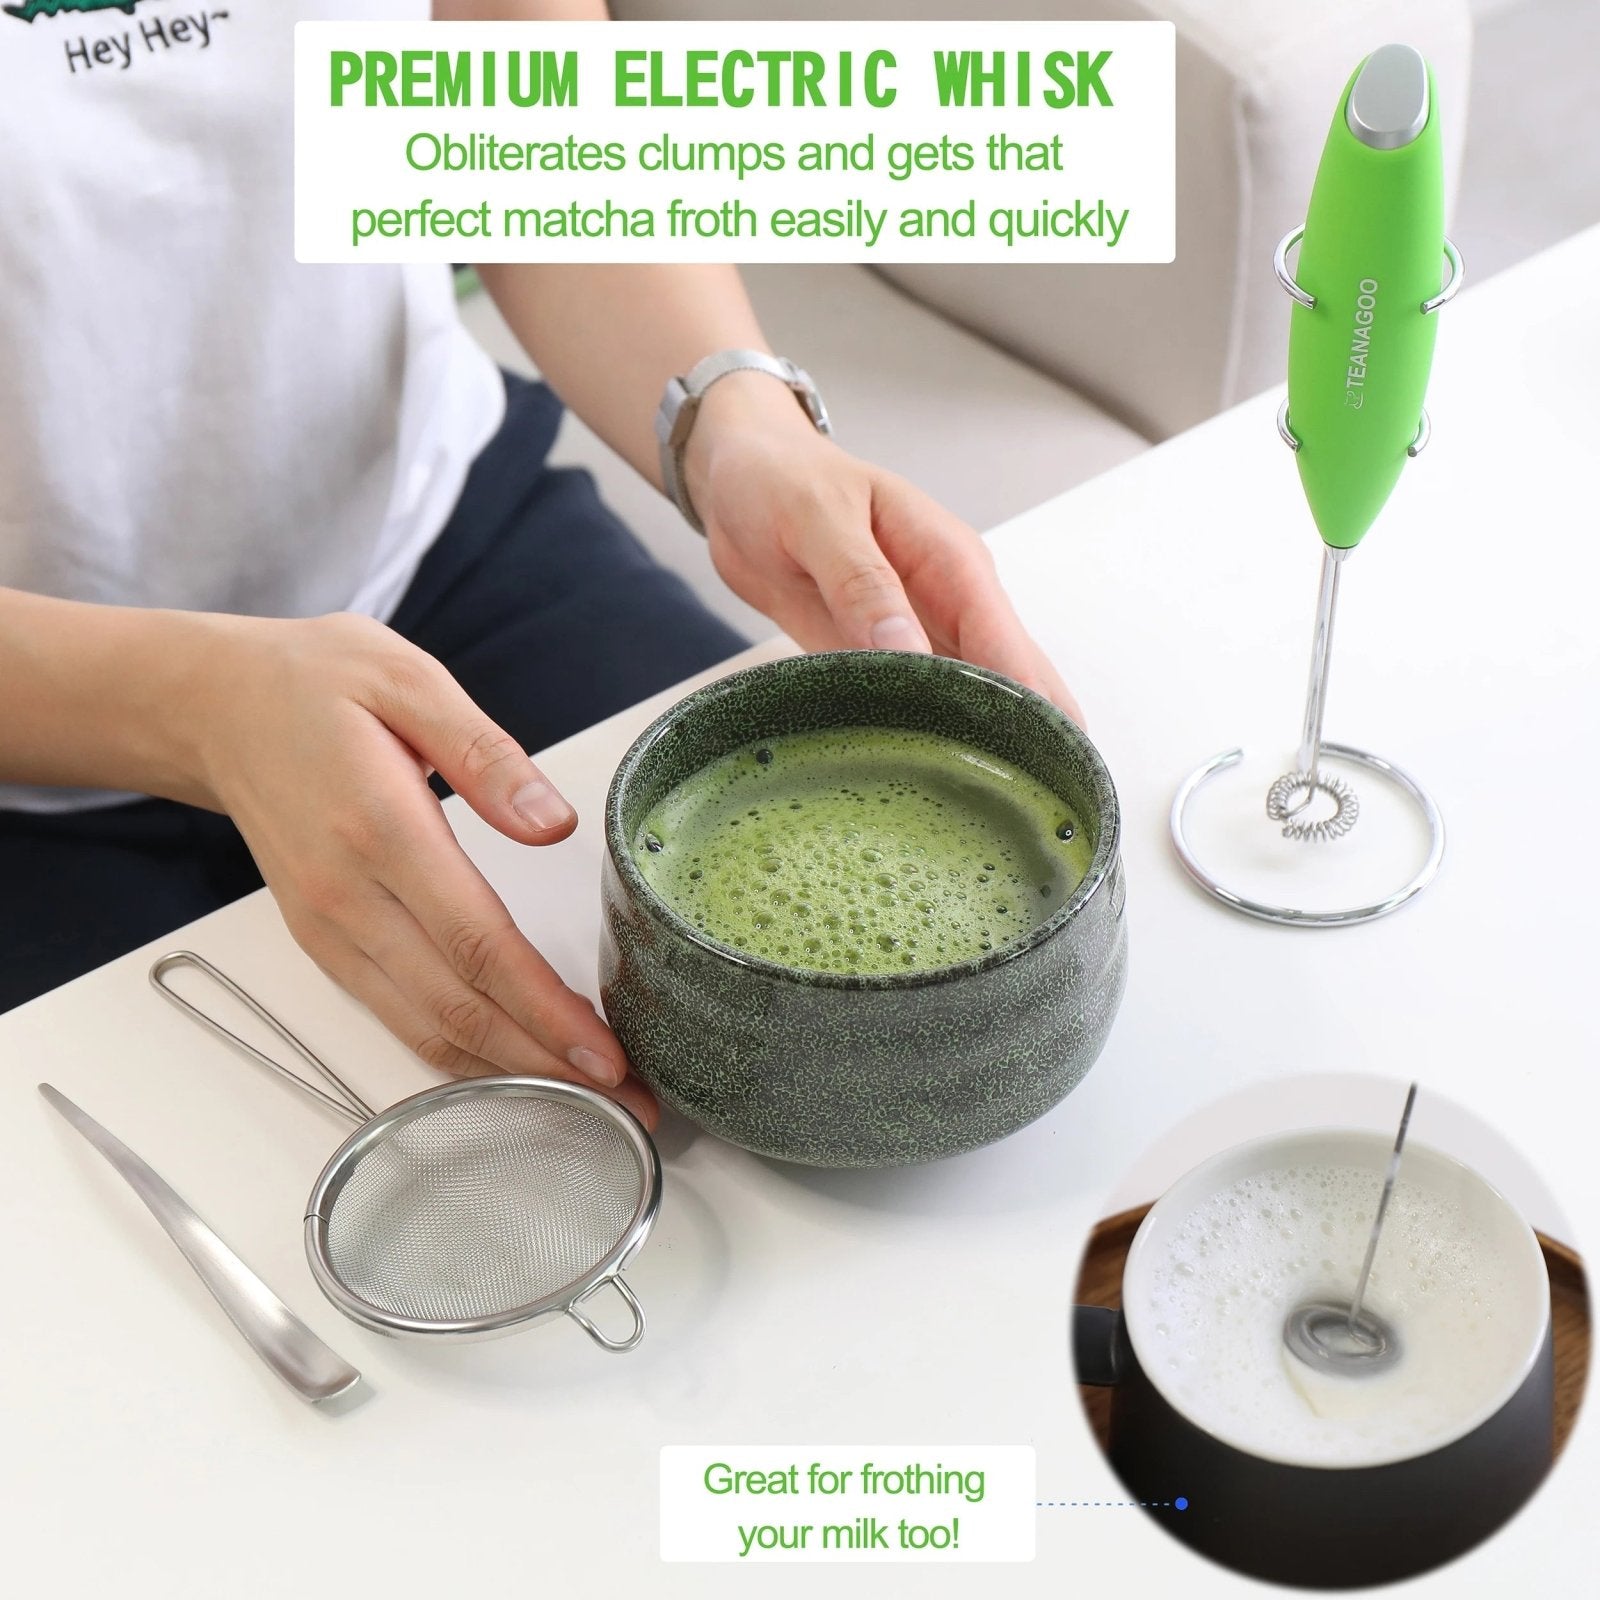 Matcha Whisk vs Milk Frother